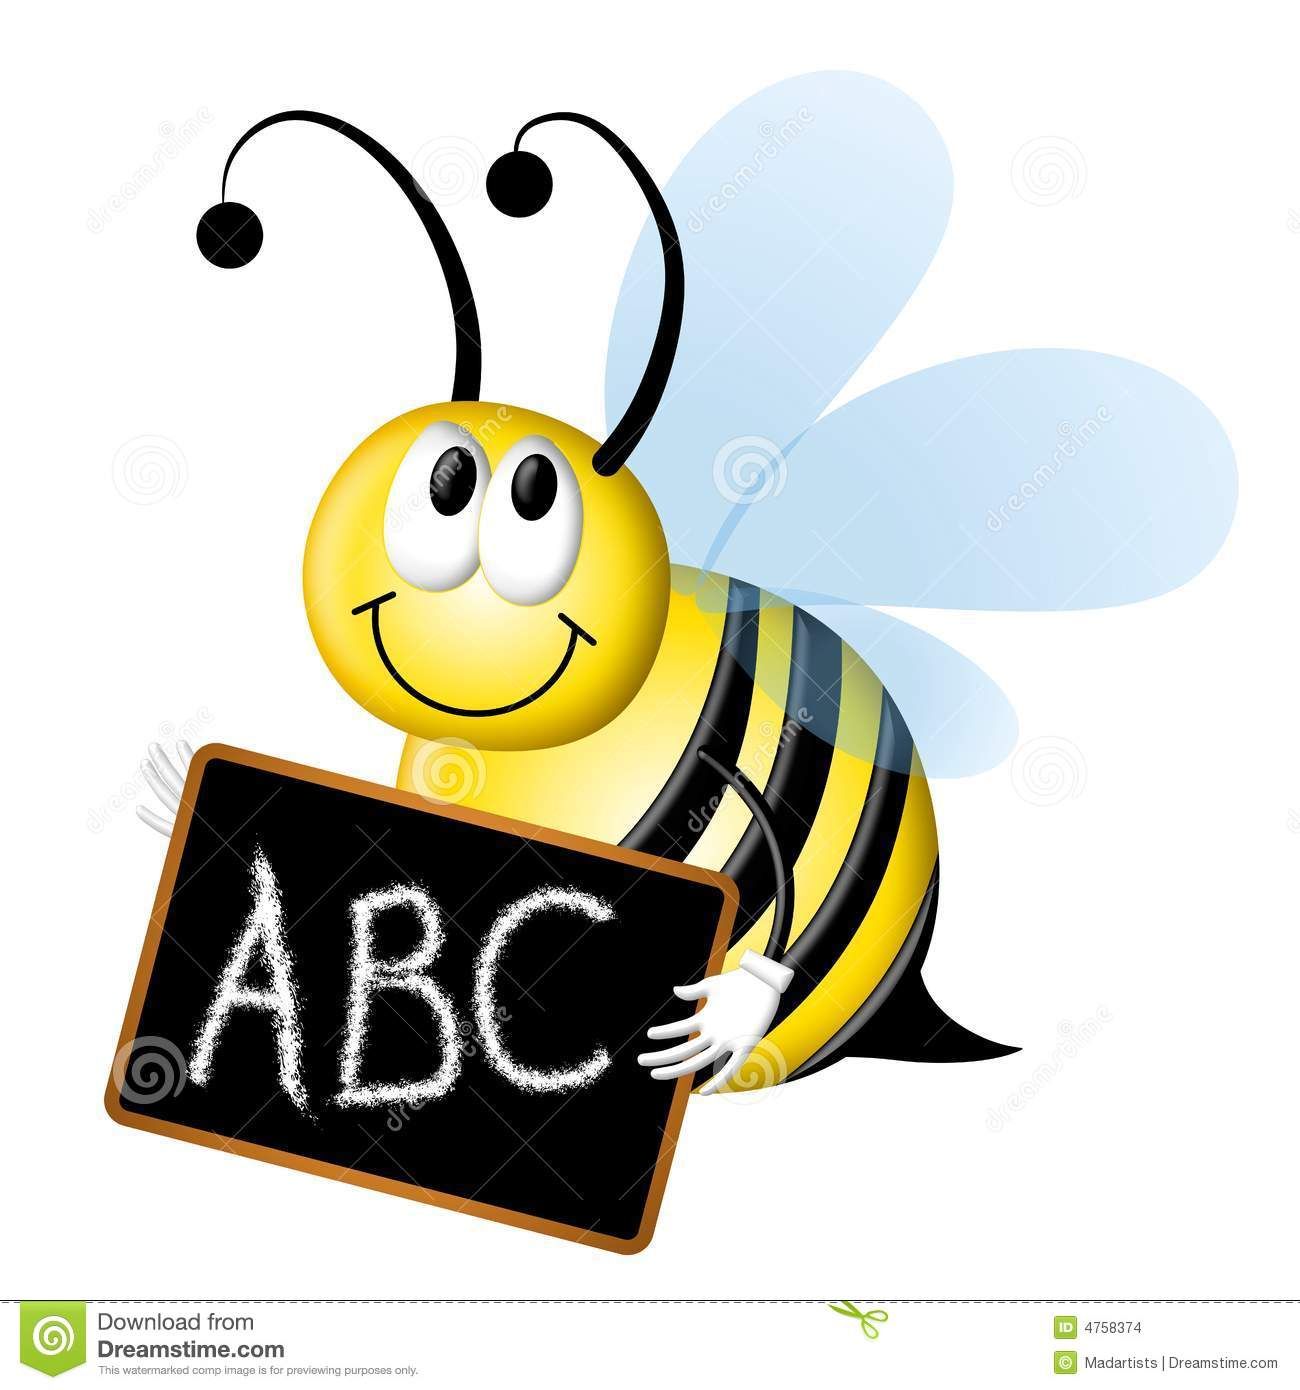 Bumblebee clipart spelling bee. Bumble clip art featuring